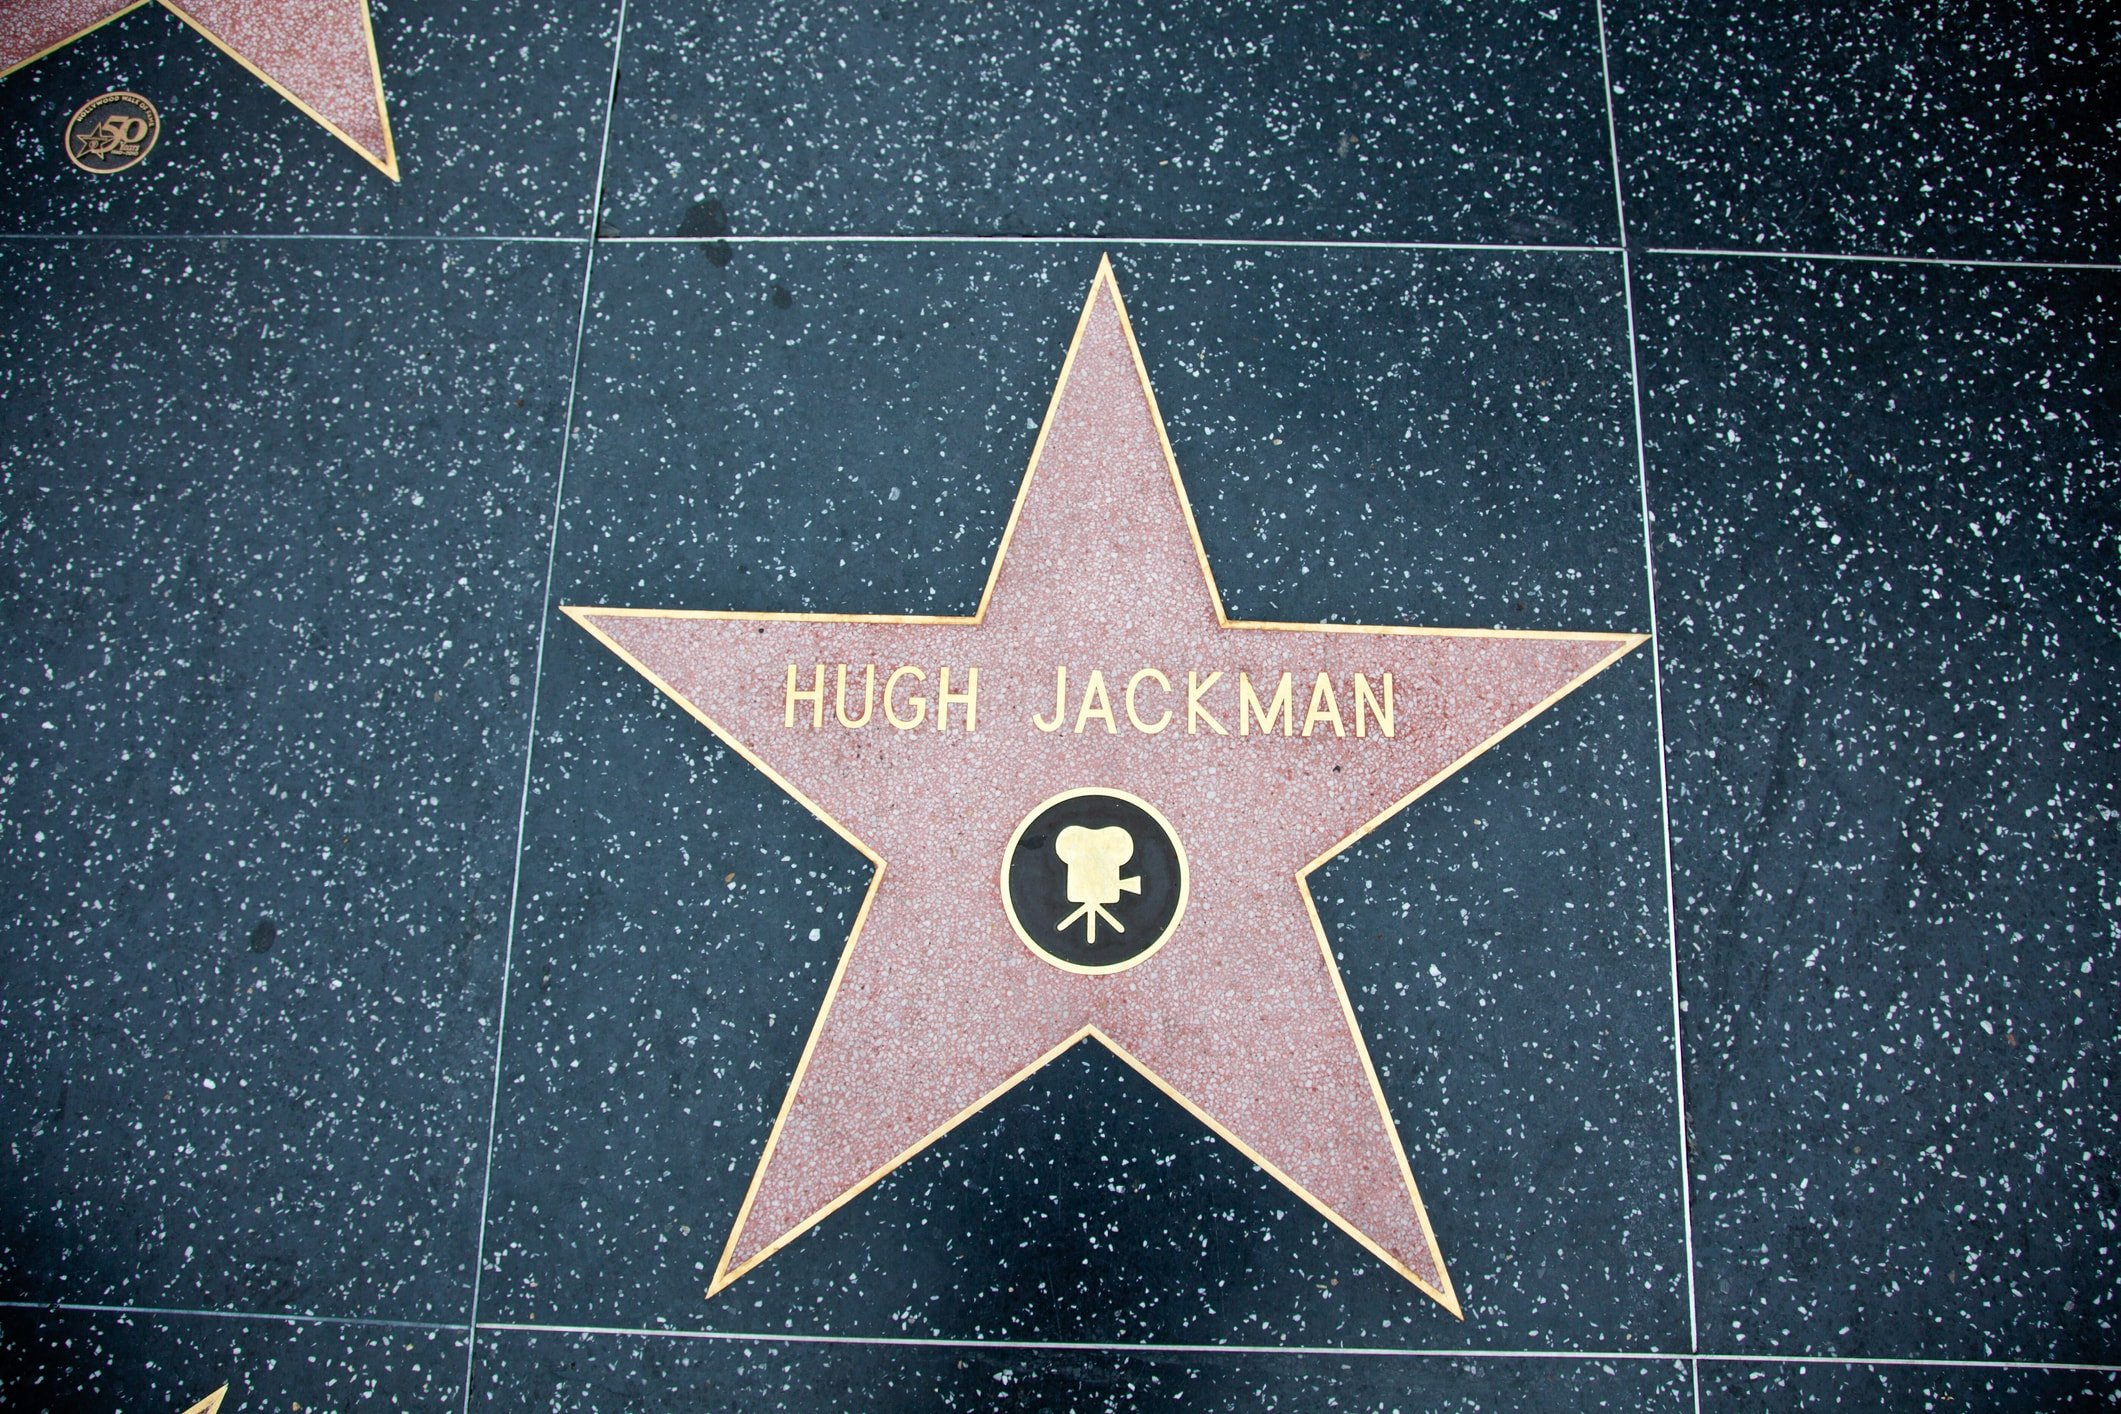 "Hollywood, California, USA - February 5, 2013: Hollywood Walk Of Fame Hugh Jackman achievement in the entertainment industry star."